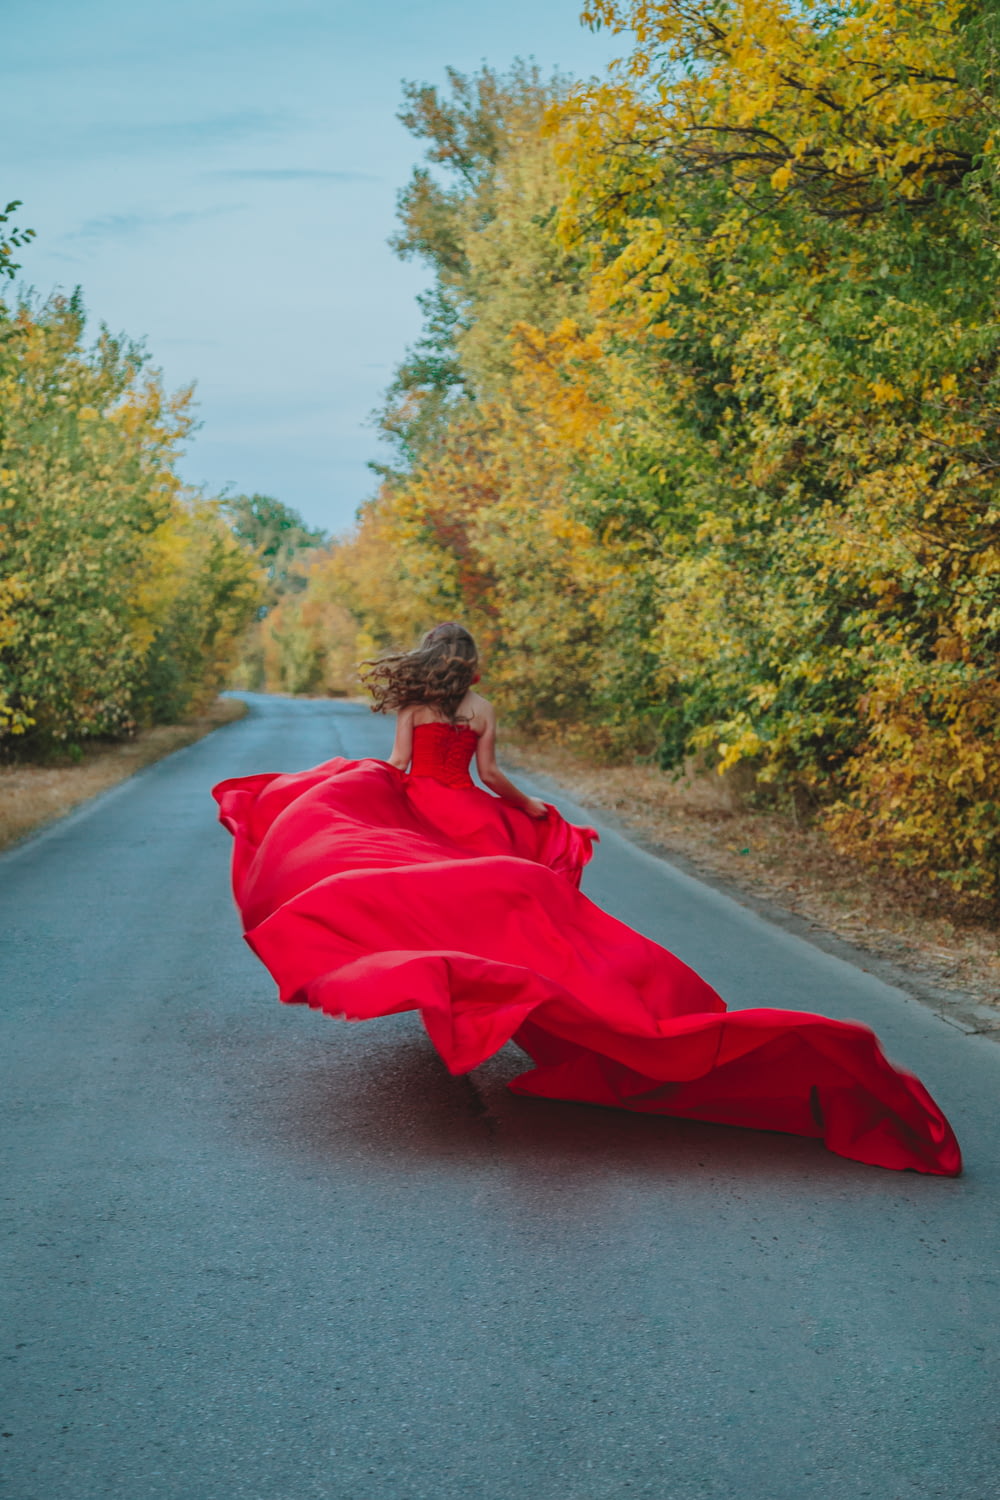 woman in red dress sitting on gray concrete road during daytime